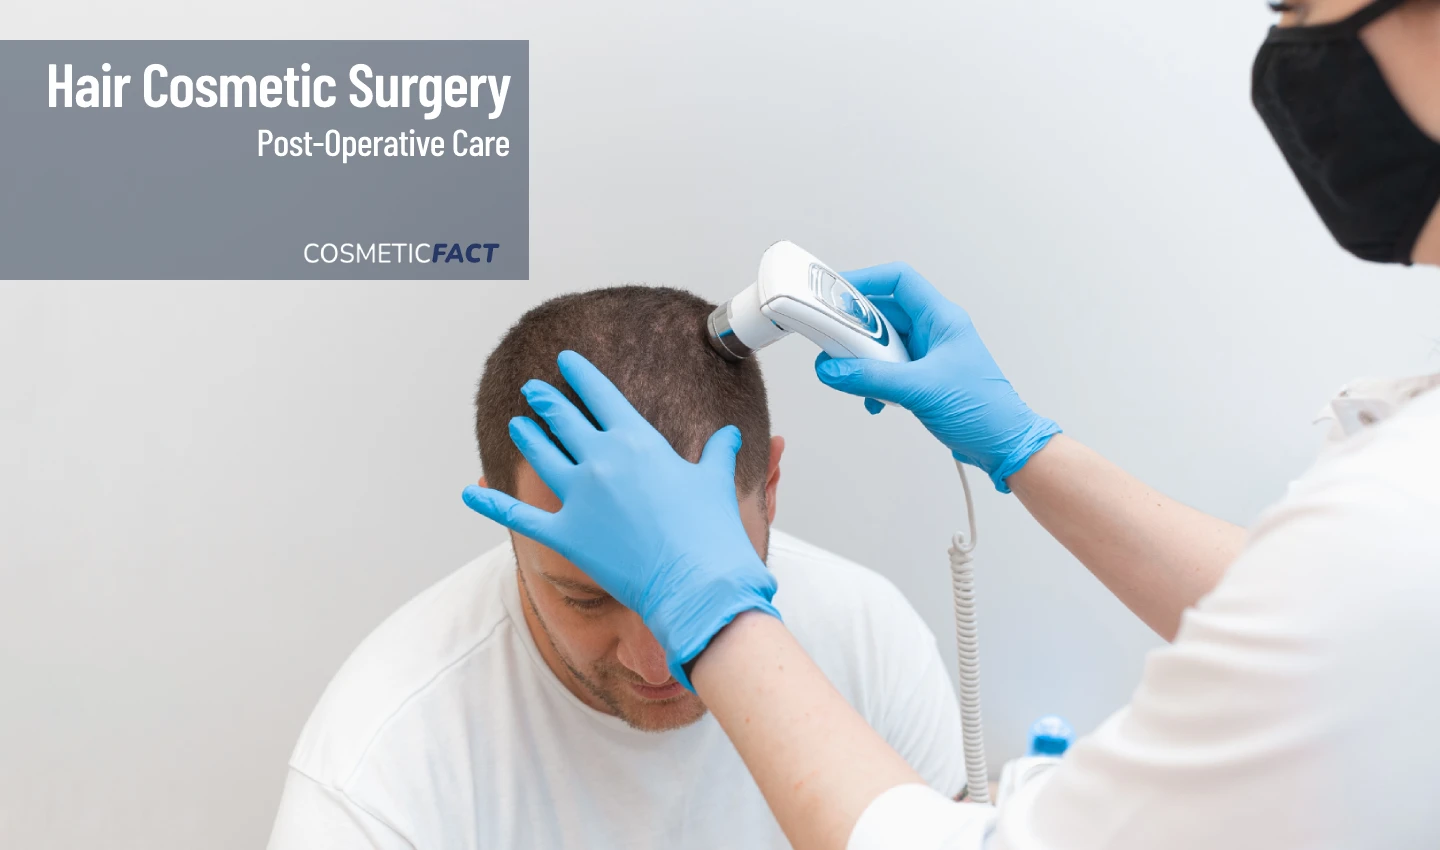 A doctor performing scalp care on a patient who has undergone hair restoration surgery, highlighting the importance of post-surgery scalp care.